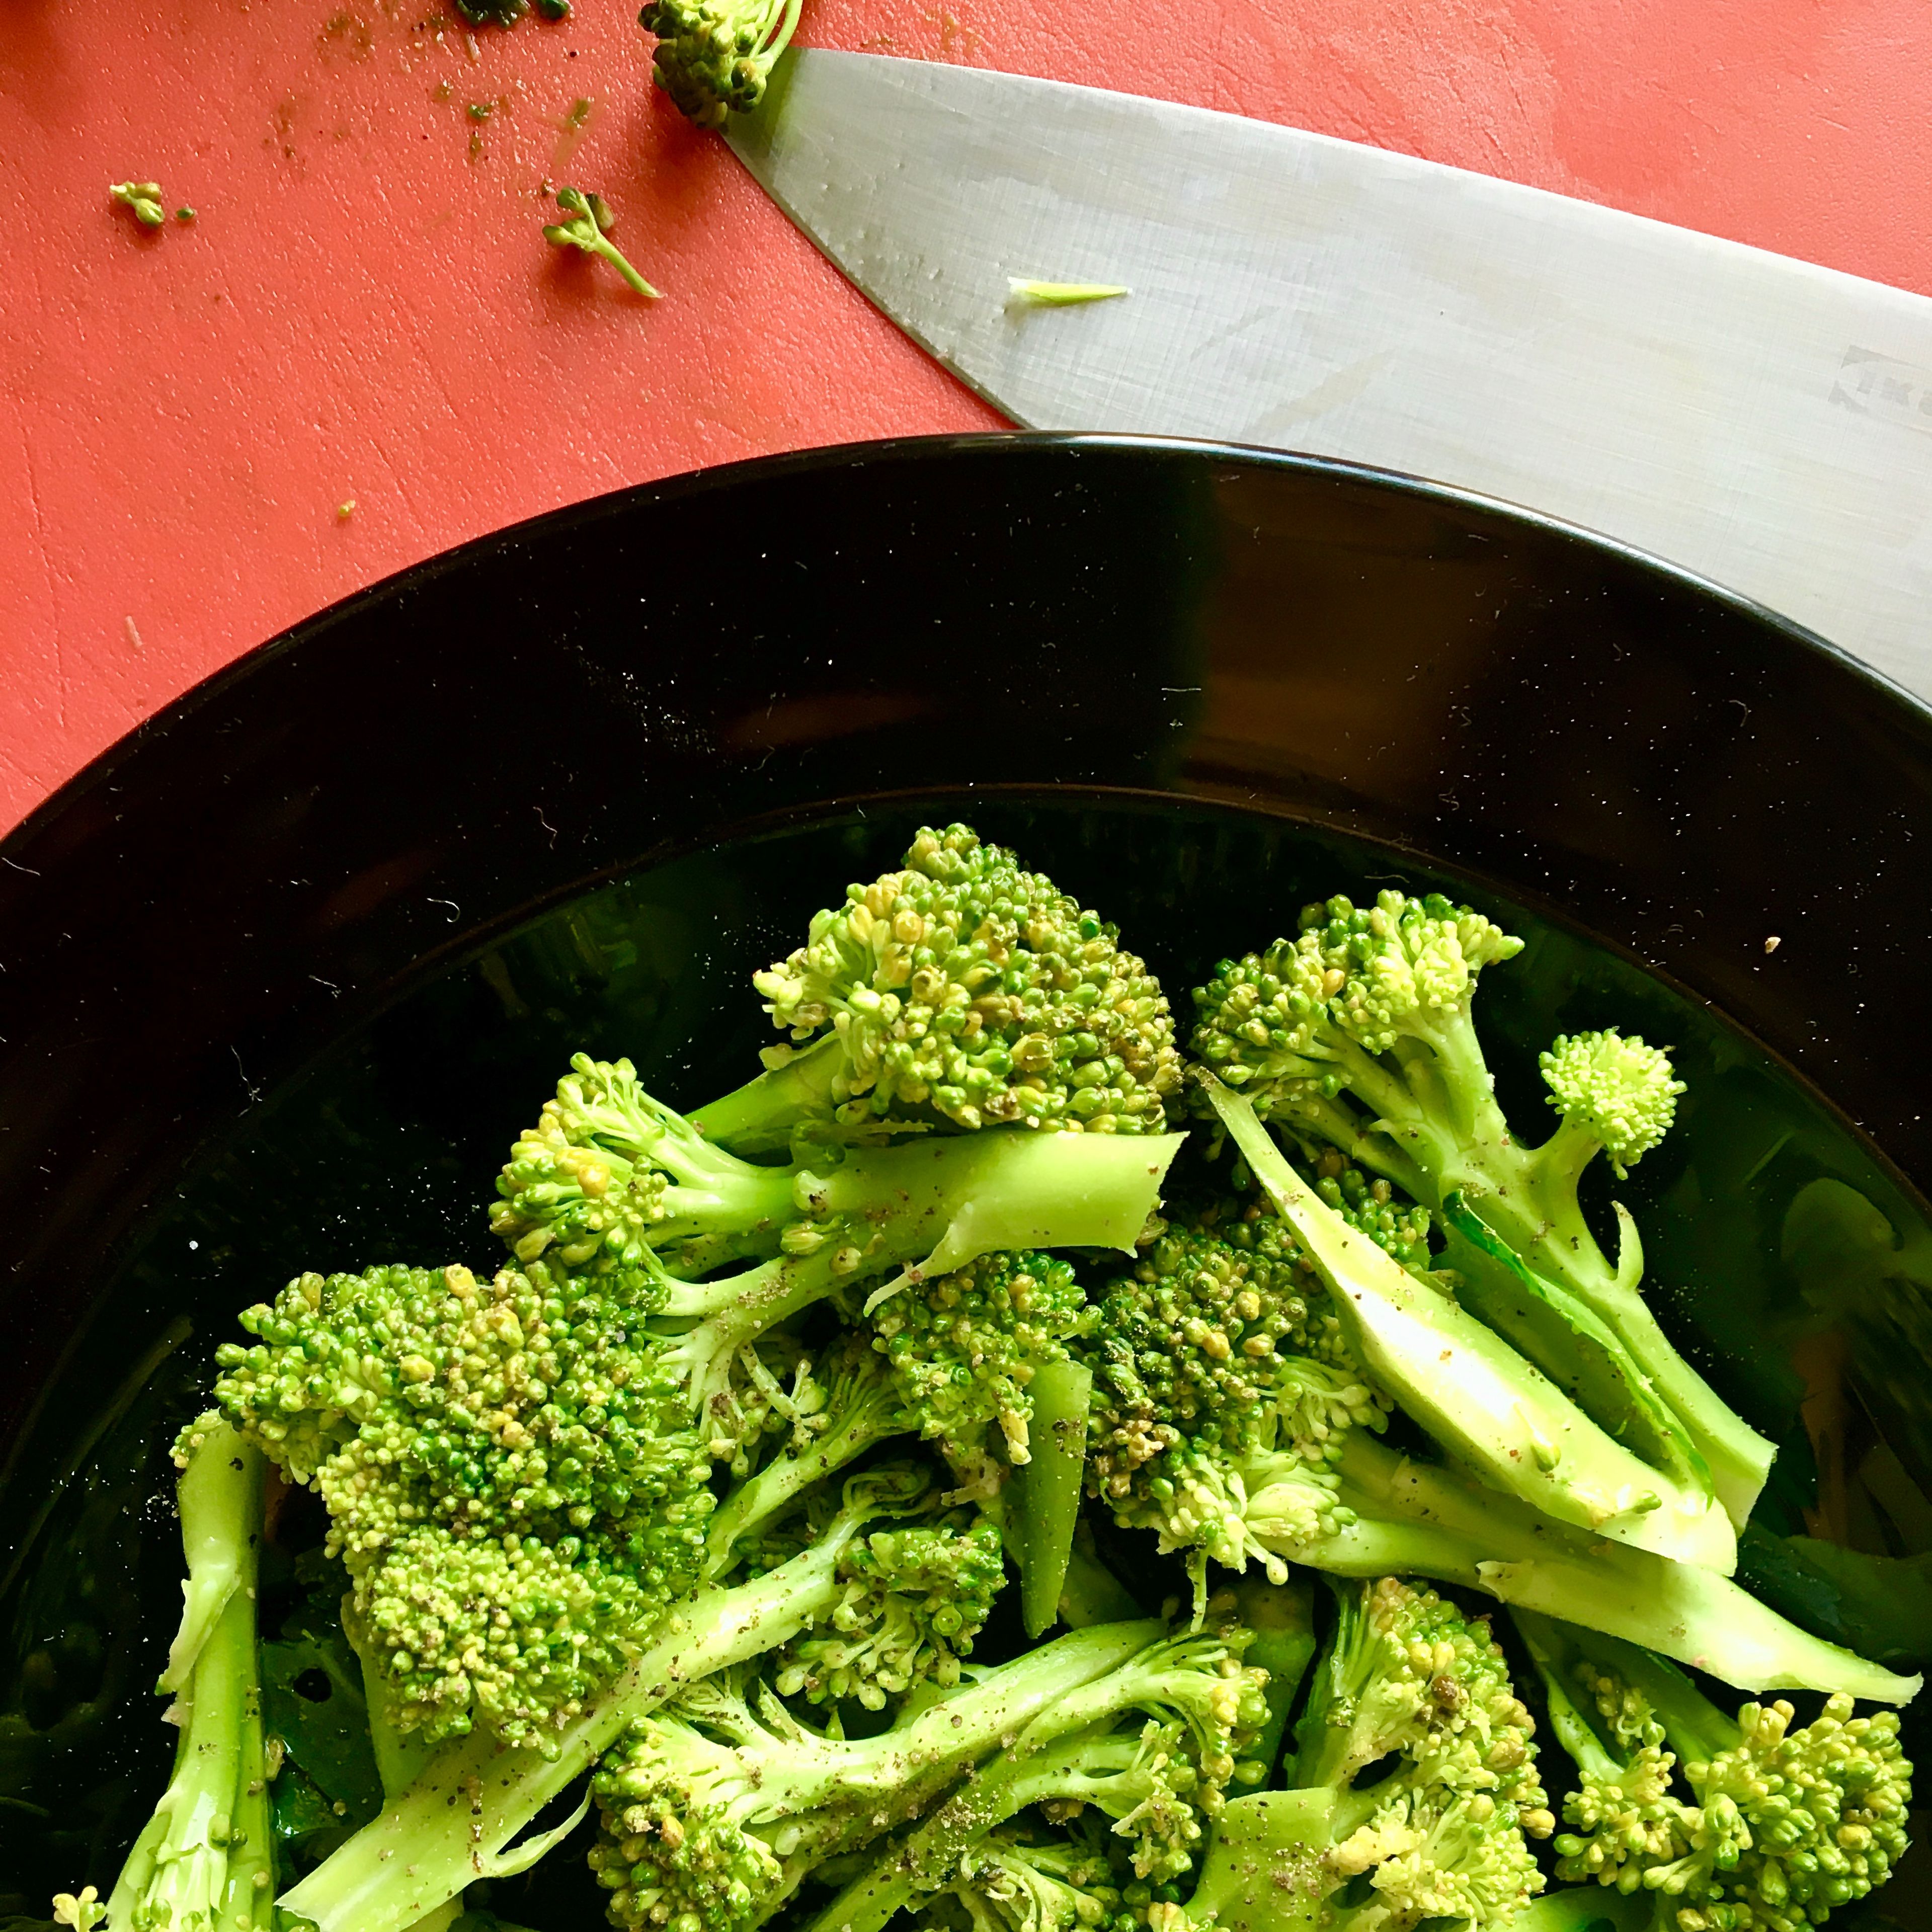 Place broccoli in a microwave-safe bowl, season with remaining nutmeg, salt and pepper. Drizzle with olive oil and a splash of water. Microwave for 2 min. until barely cooked.